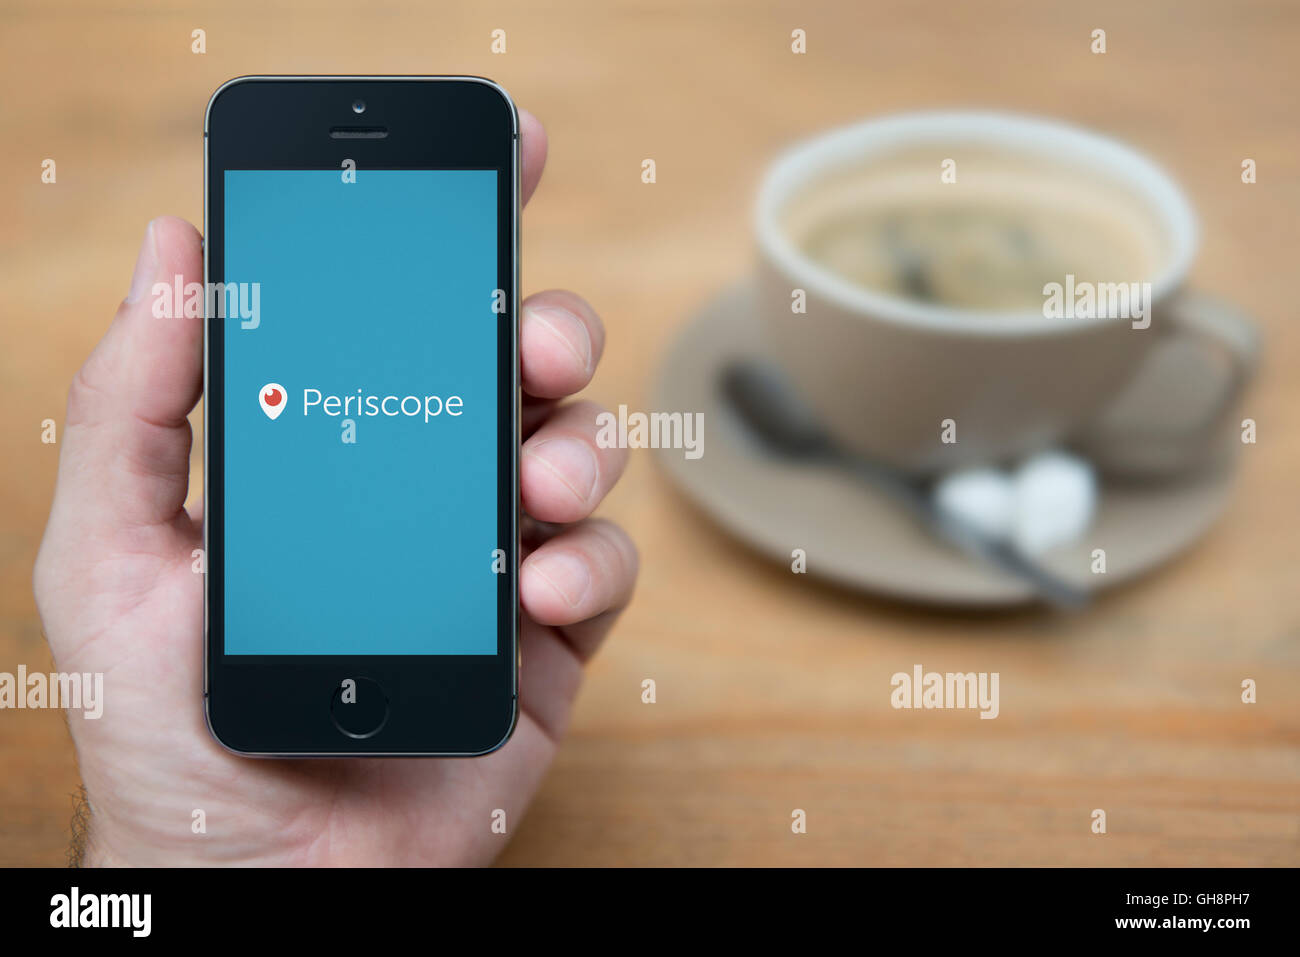 A man looks at his iPhone which displays the Periscope logo, while sat with a cup of coffee (Editorial use only). Stock Photo